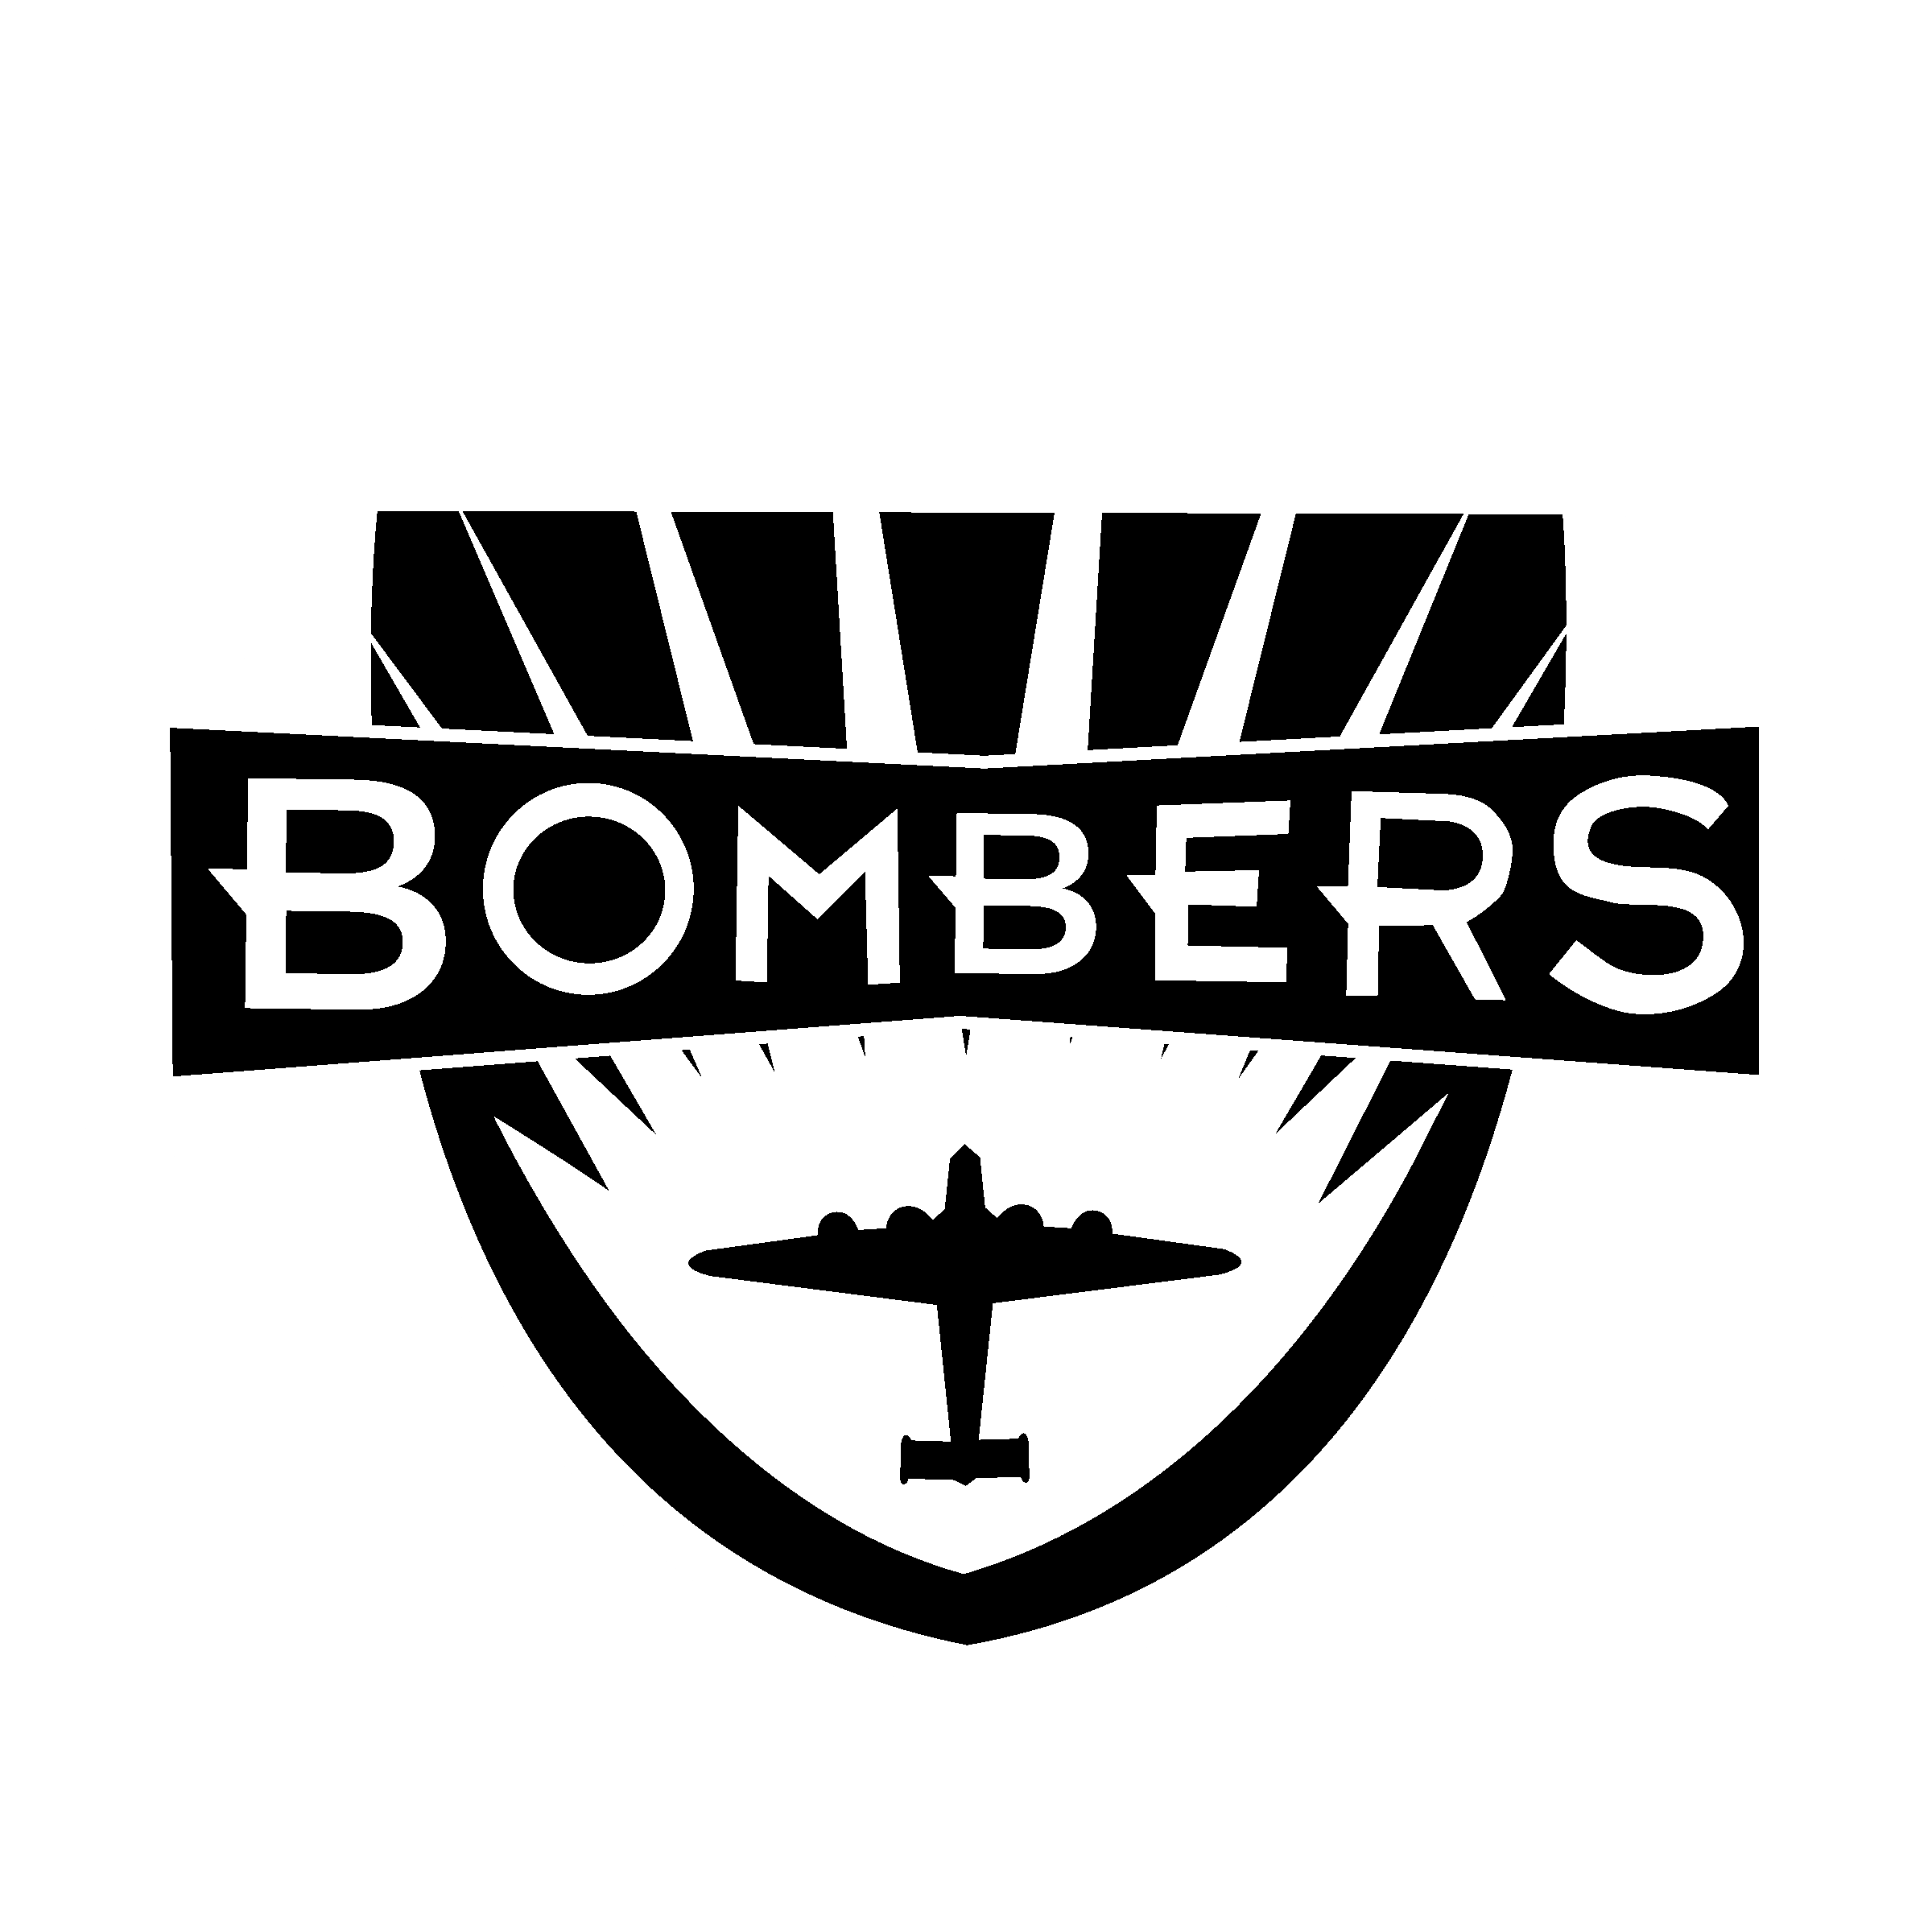 Bombers Logo - Baltimore Bombers Logo PNG Transparent & SVG Vector - Freebie Supply